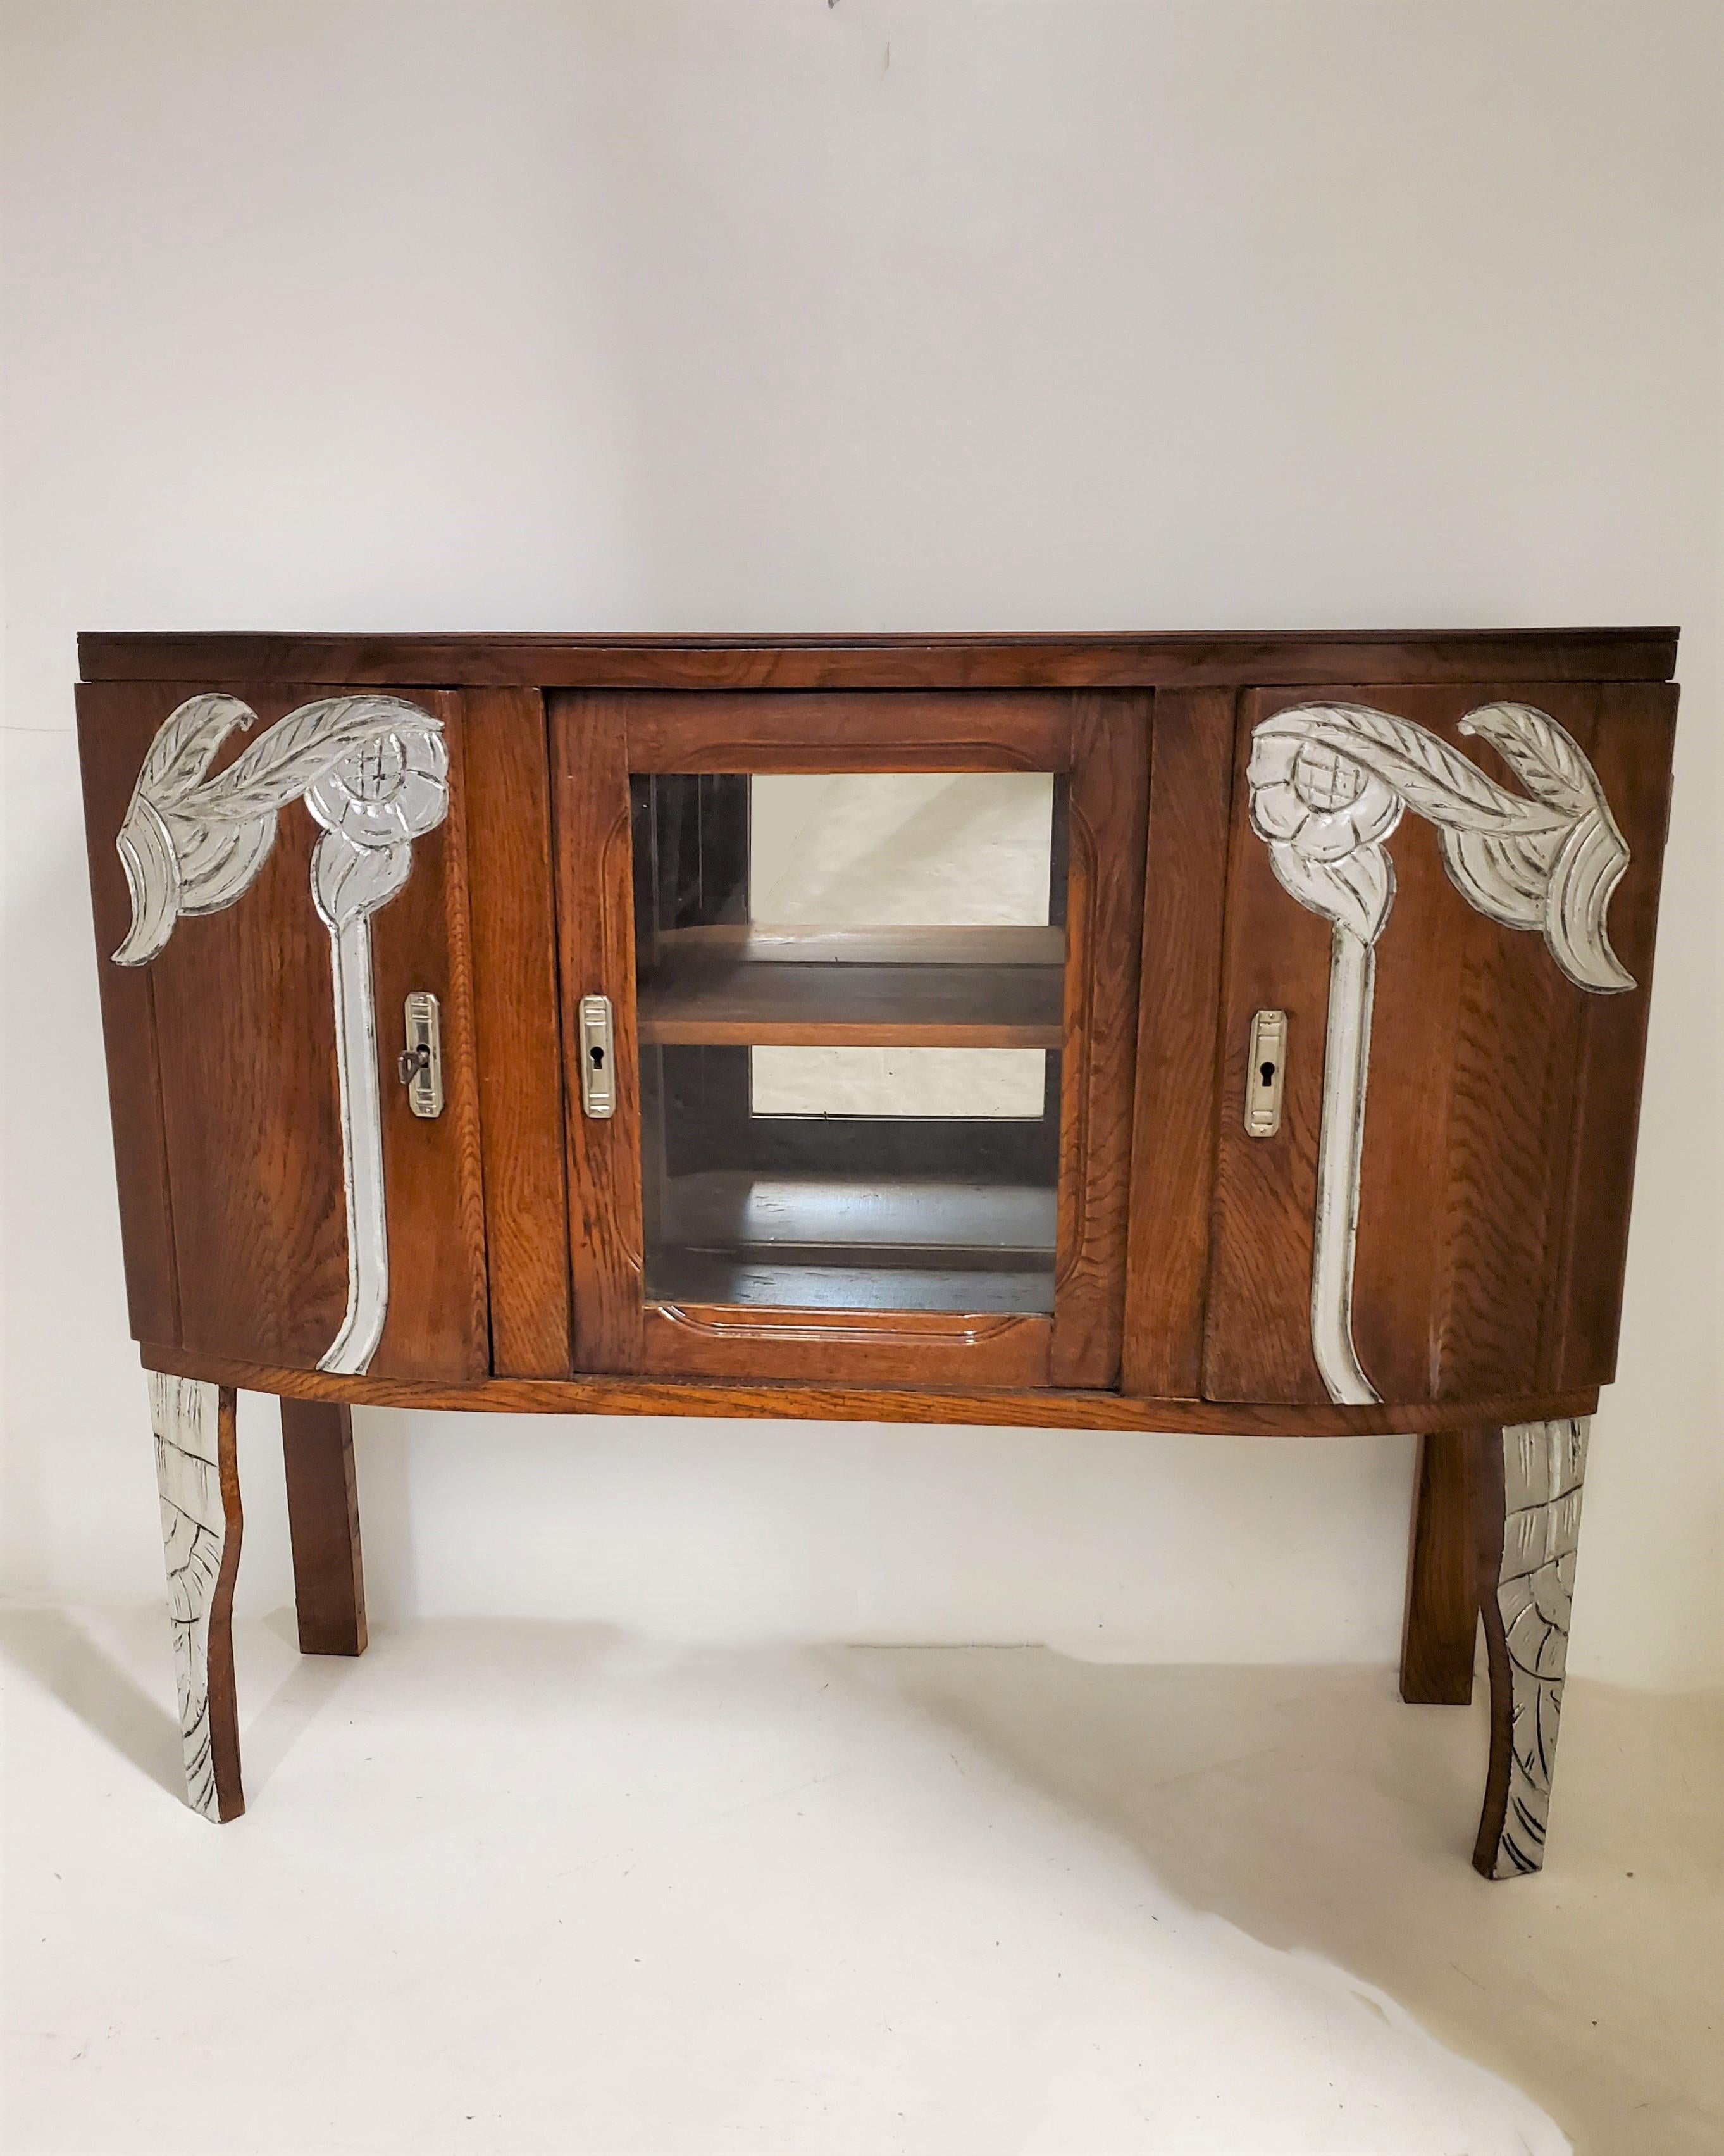 A petite French Art Deco three door European oak cabinet with hand carved metal leaf detail of stylized floral, leafage and linear design. 
The center of the cabinet houses a mirrored backed glass display case.
Geometric, fluted and stylized